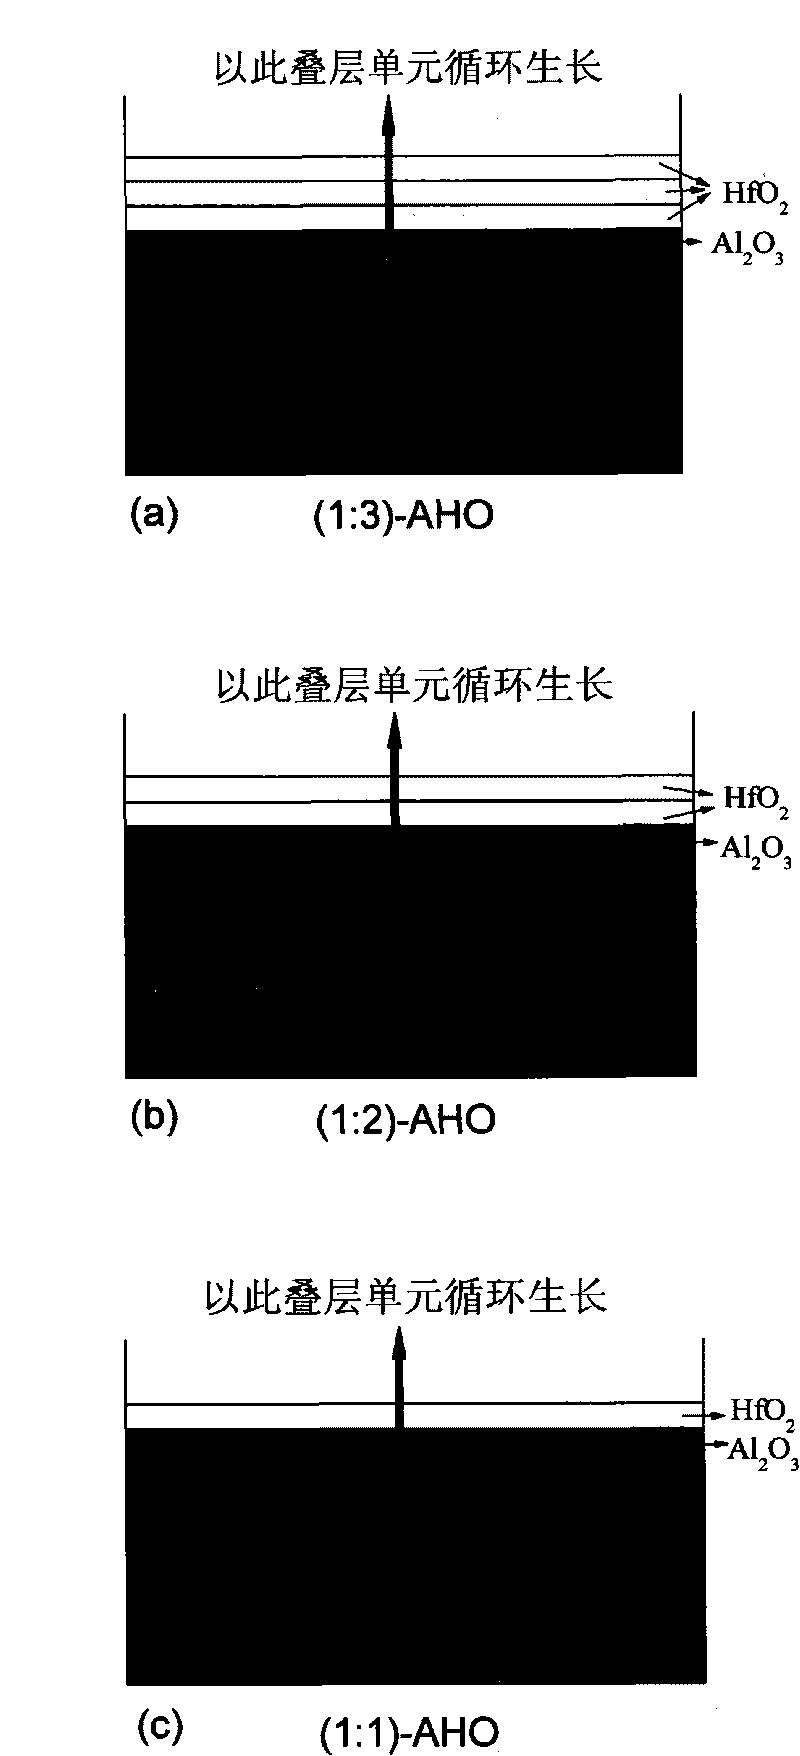 Atomic layer deposition Al2O3/HfO2 method for regulating energy band offset between GaAs semiconductor and gate dielectric